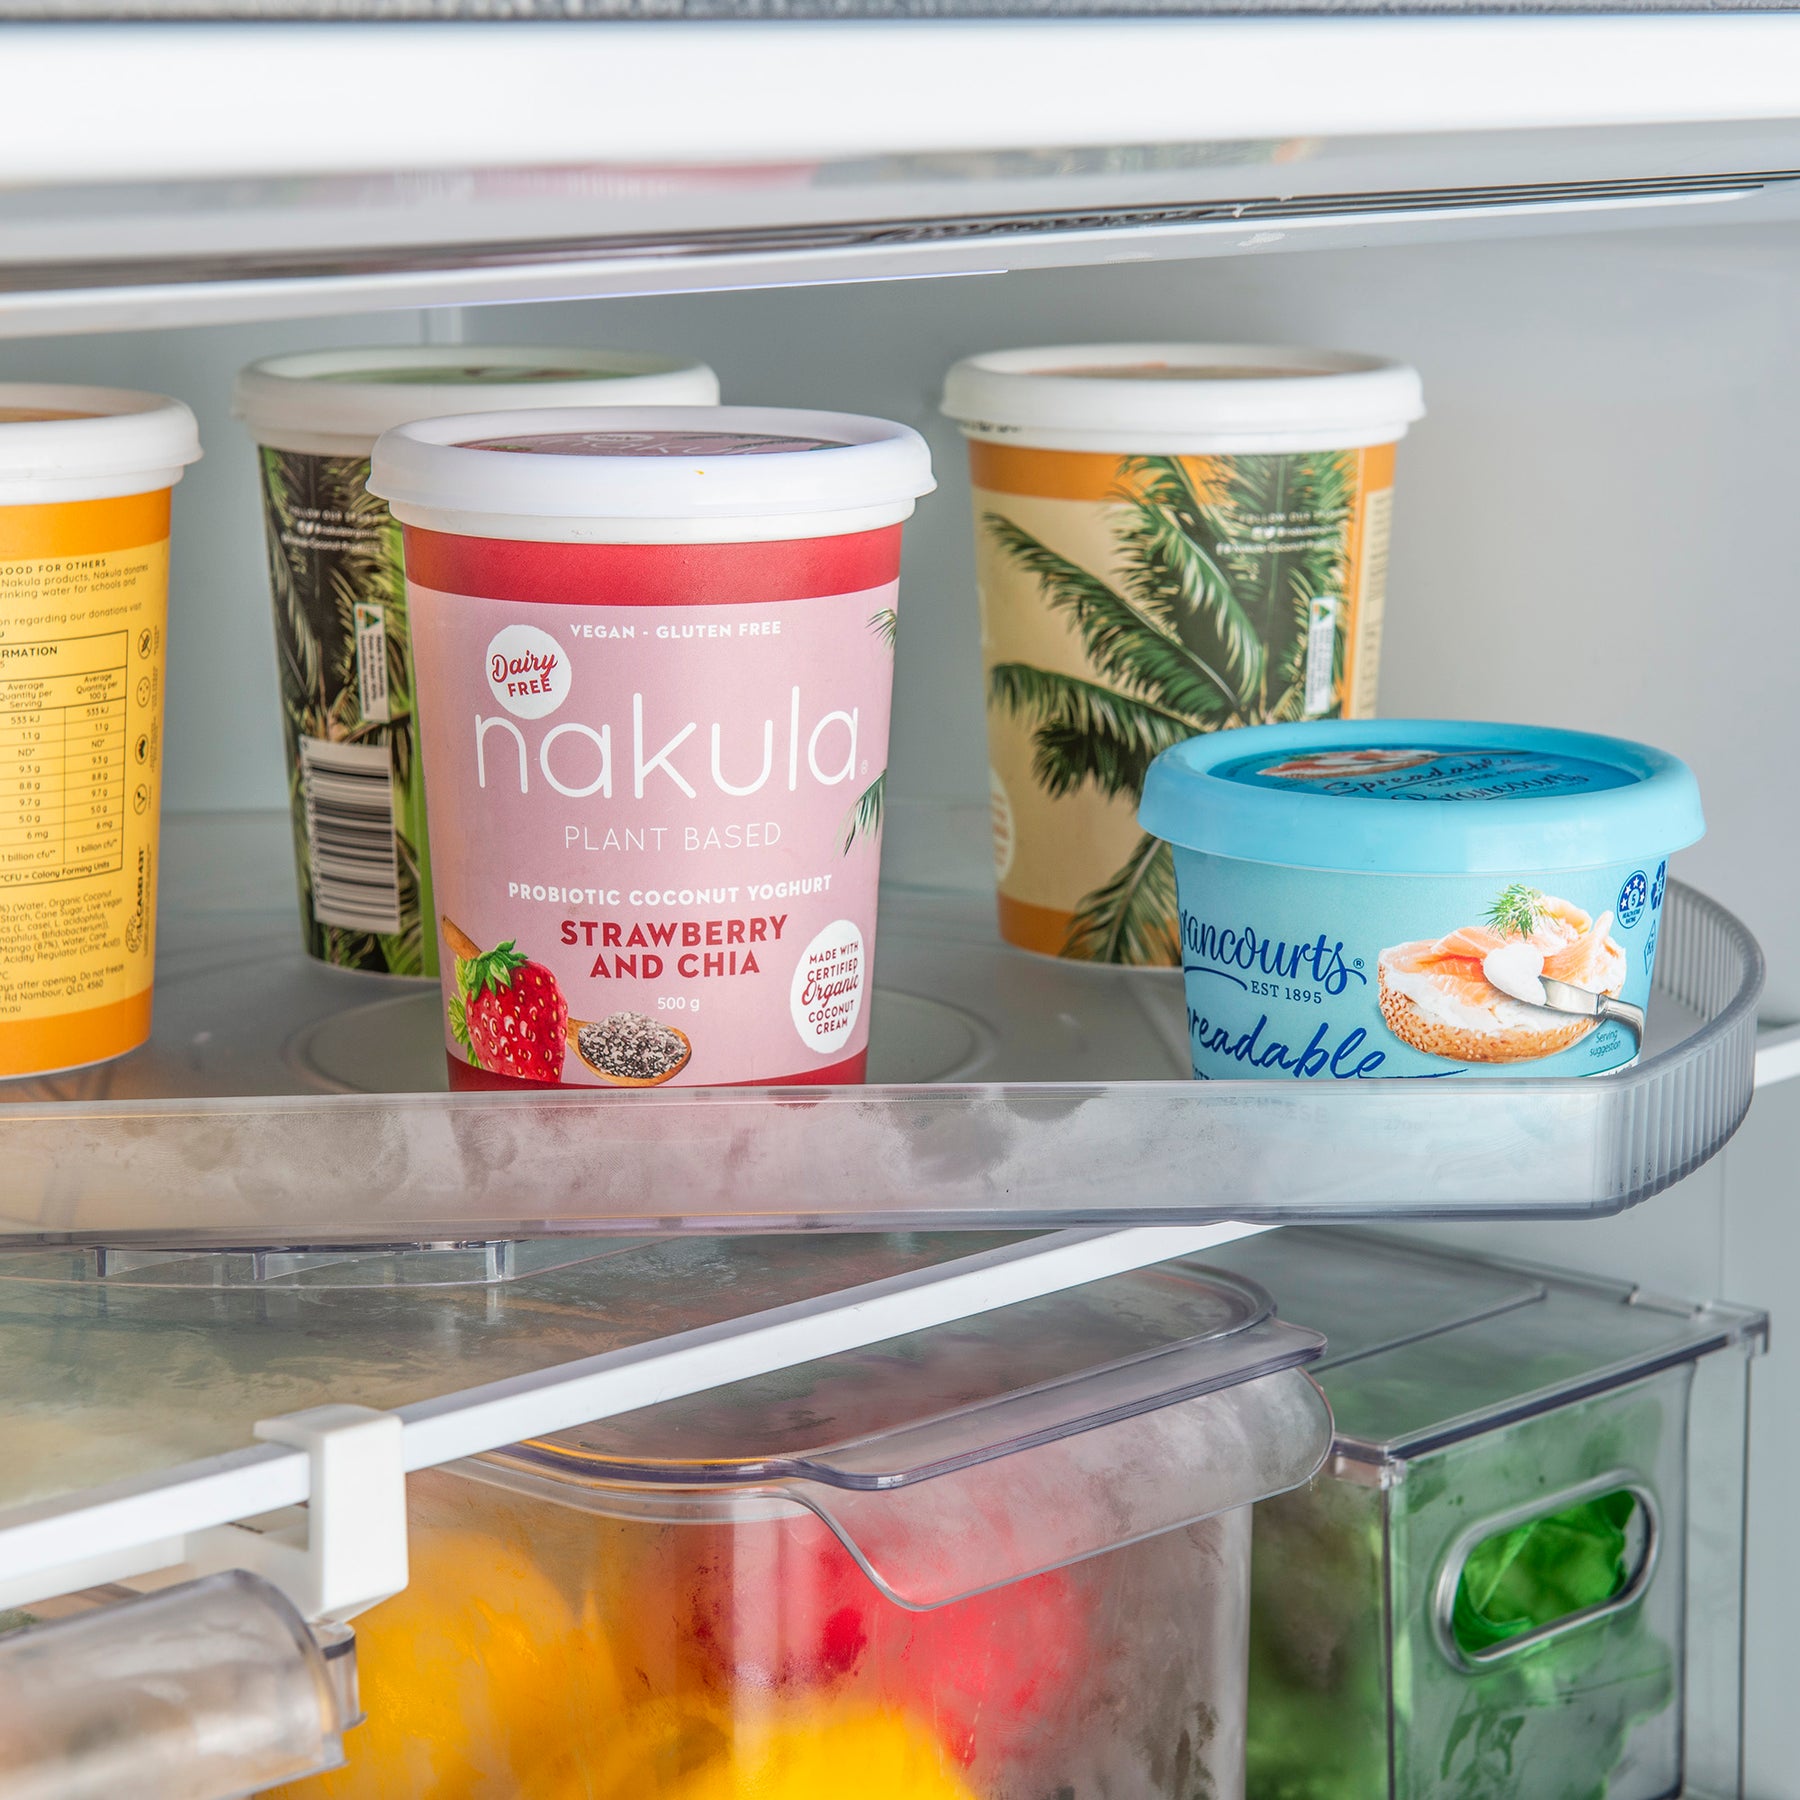 A Lazy Susan is Not Lazy; It's the Smart Choice for Kitchen and Fridge Organisation